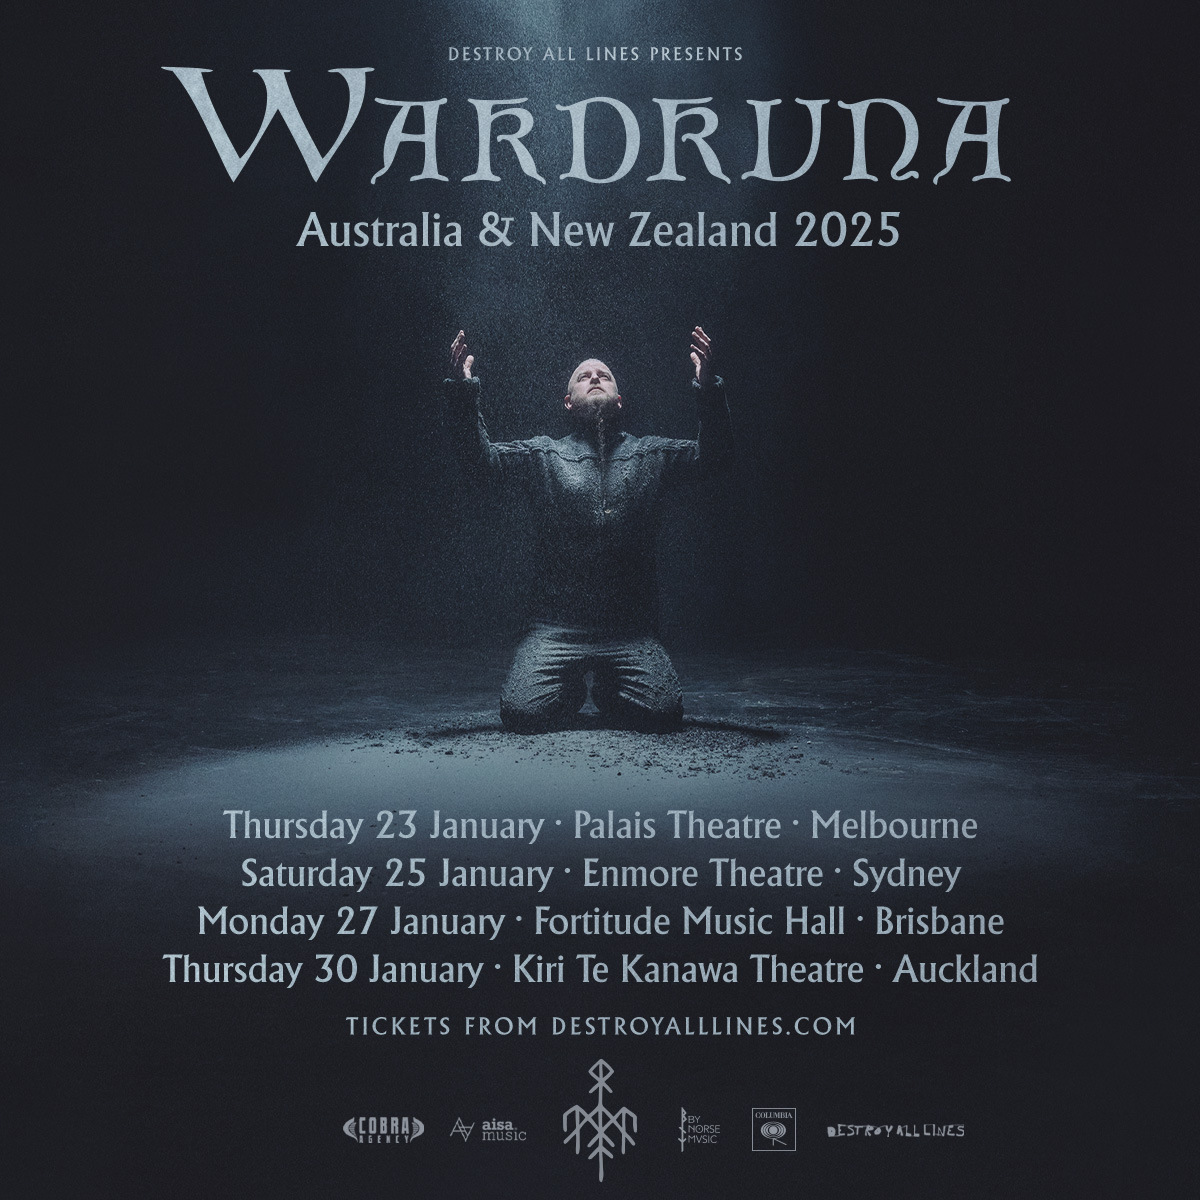 This is not a drill. @Wardruna are coming to Australia & New Zealand in 2025. Presale on now. Sign up for instant access ➟ daltours.cc/wardruna General public on-sale: Tue 16 Apr @ 9 AM local